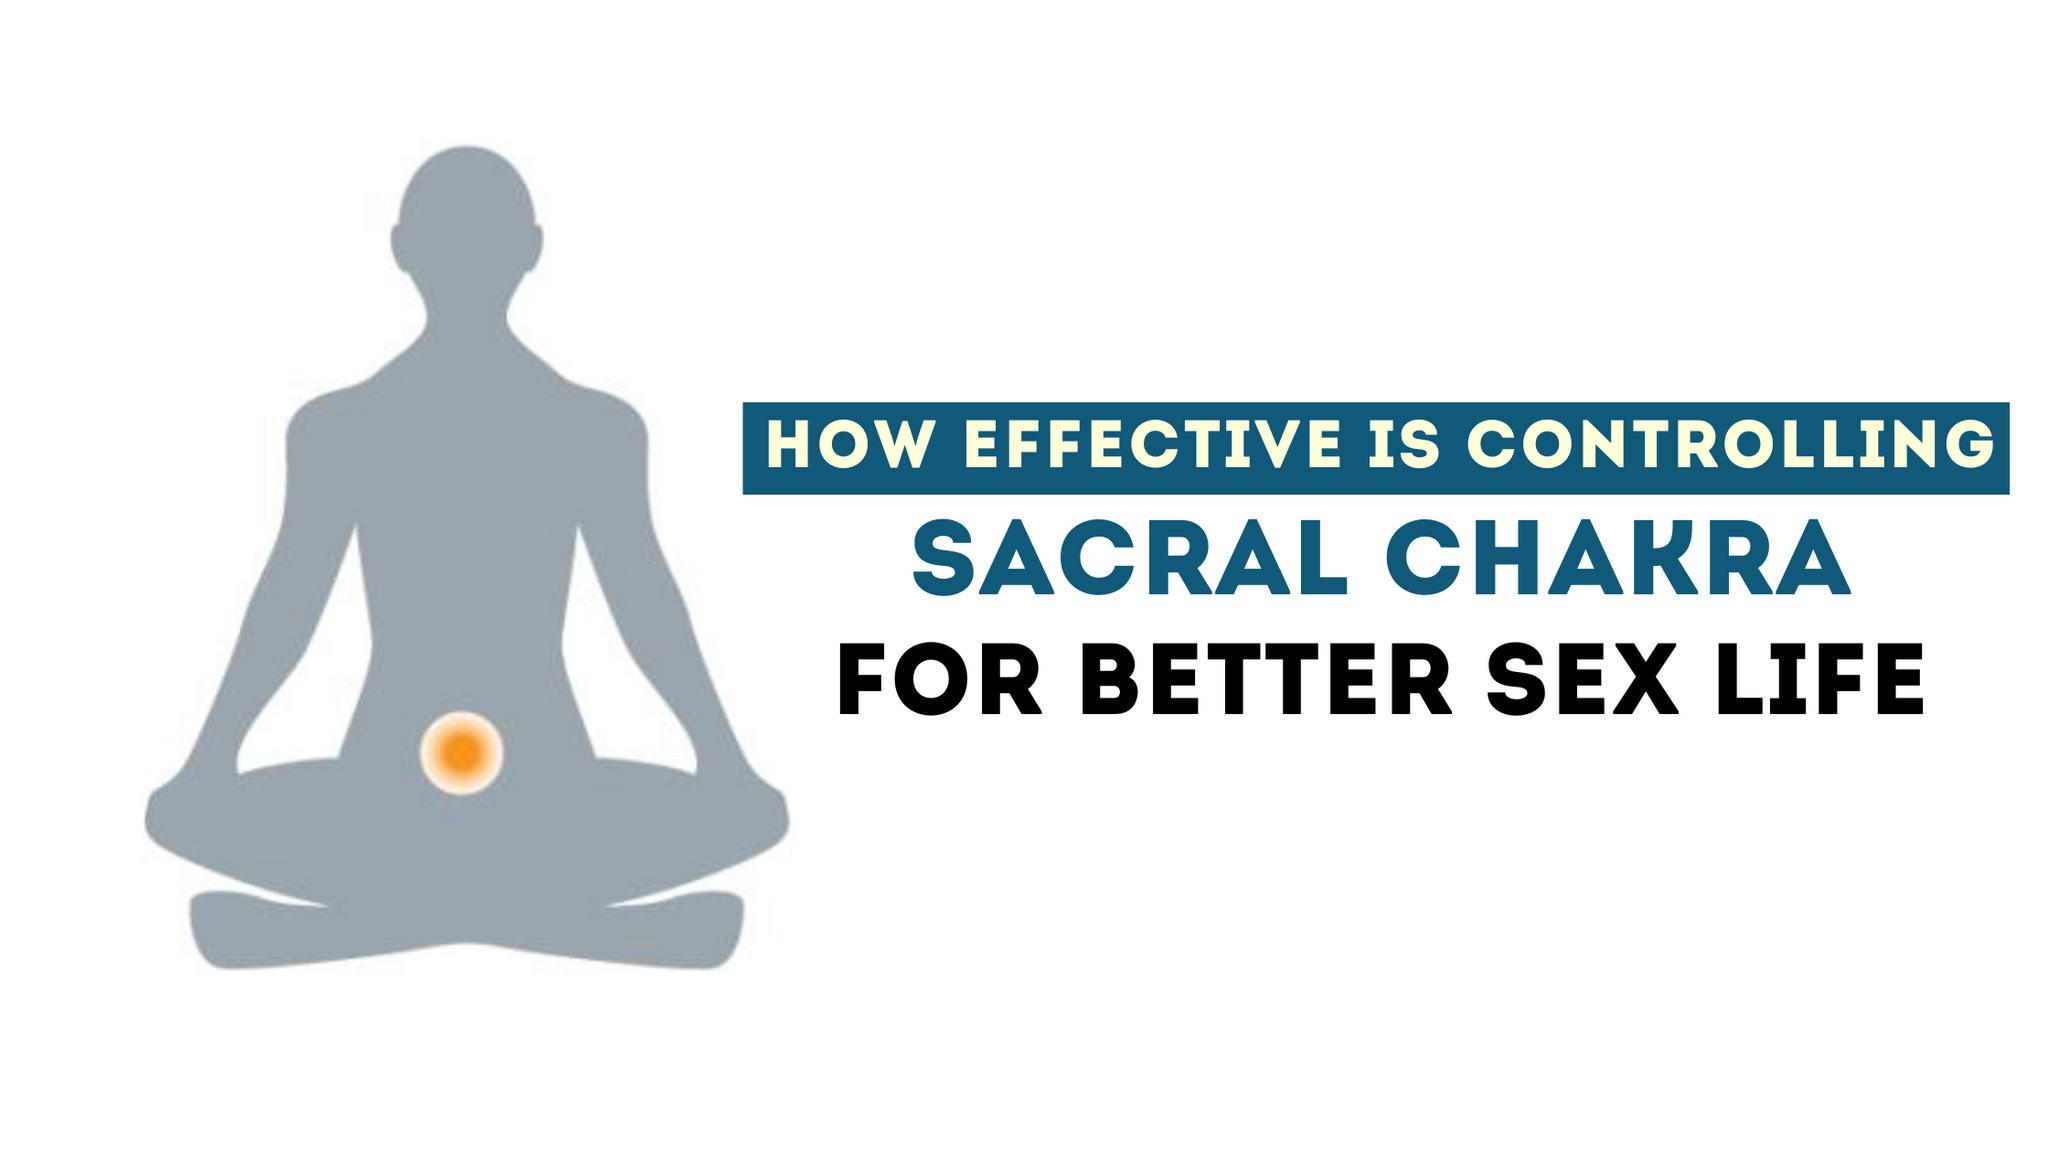 HOW EFFECTIVE IS CONTROLLING SACRAL CHAKRA FOR BETTER SEX LIFE